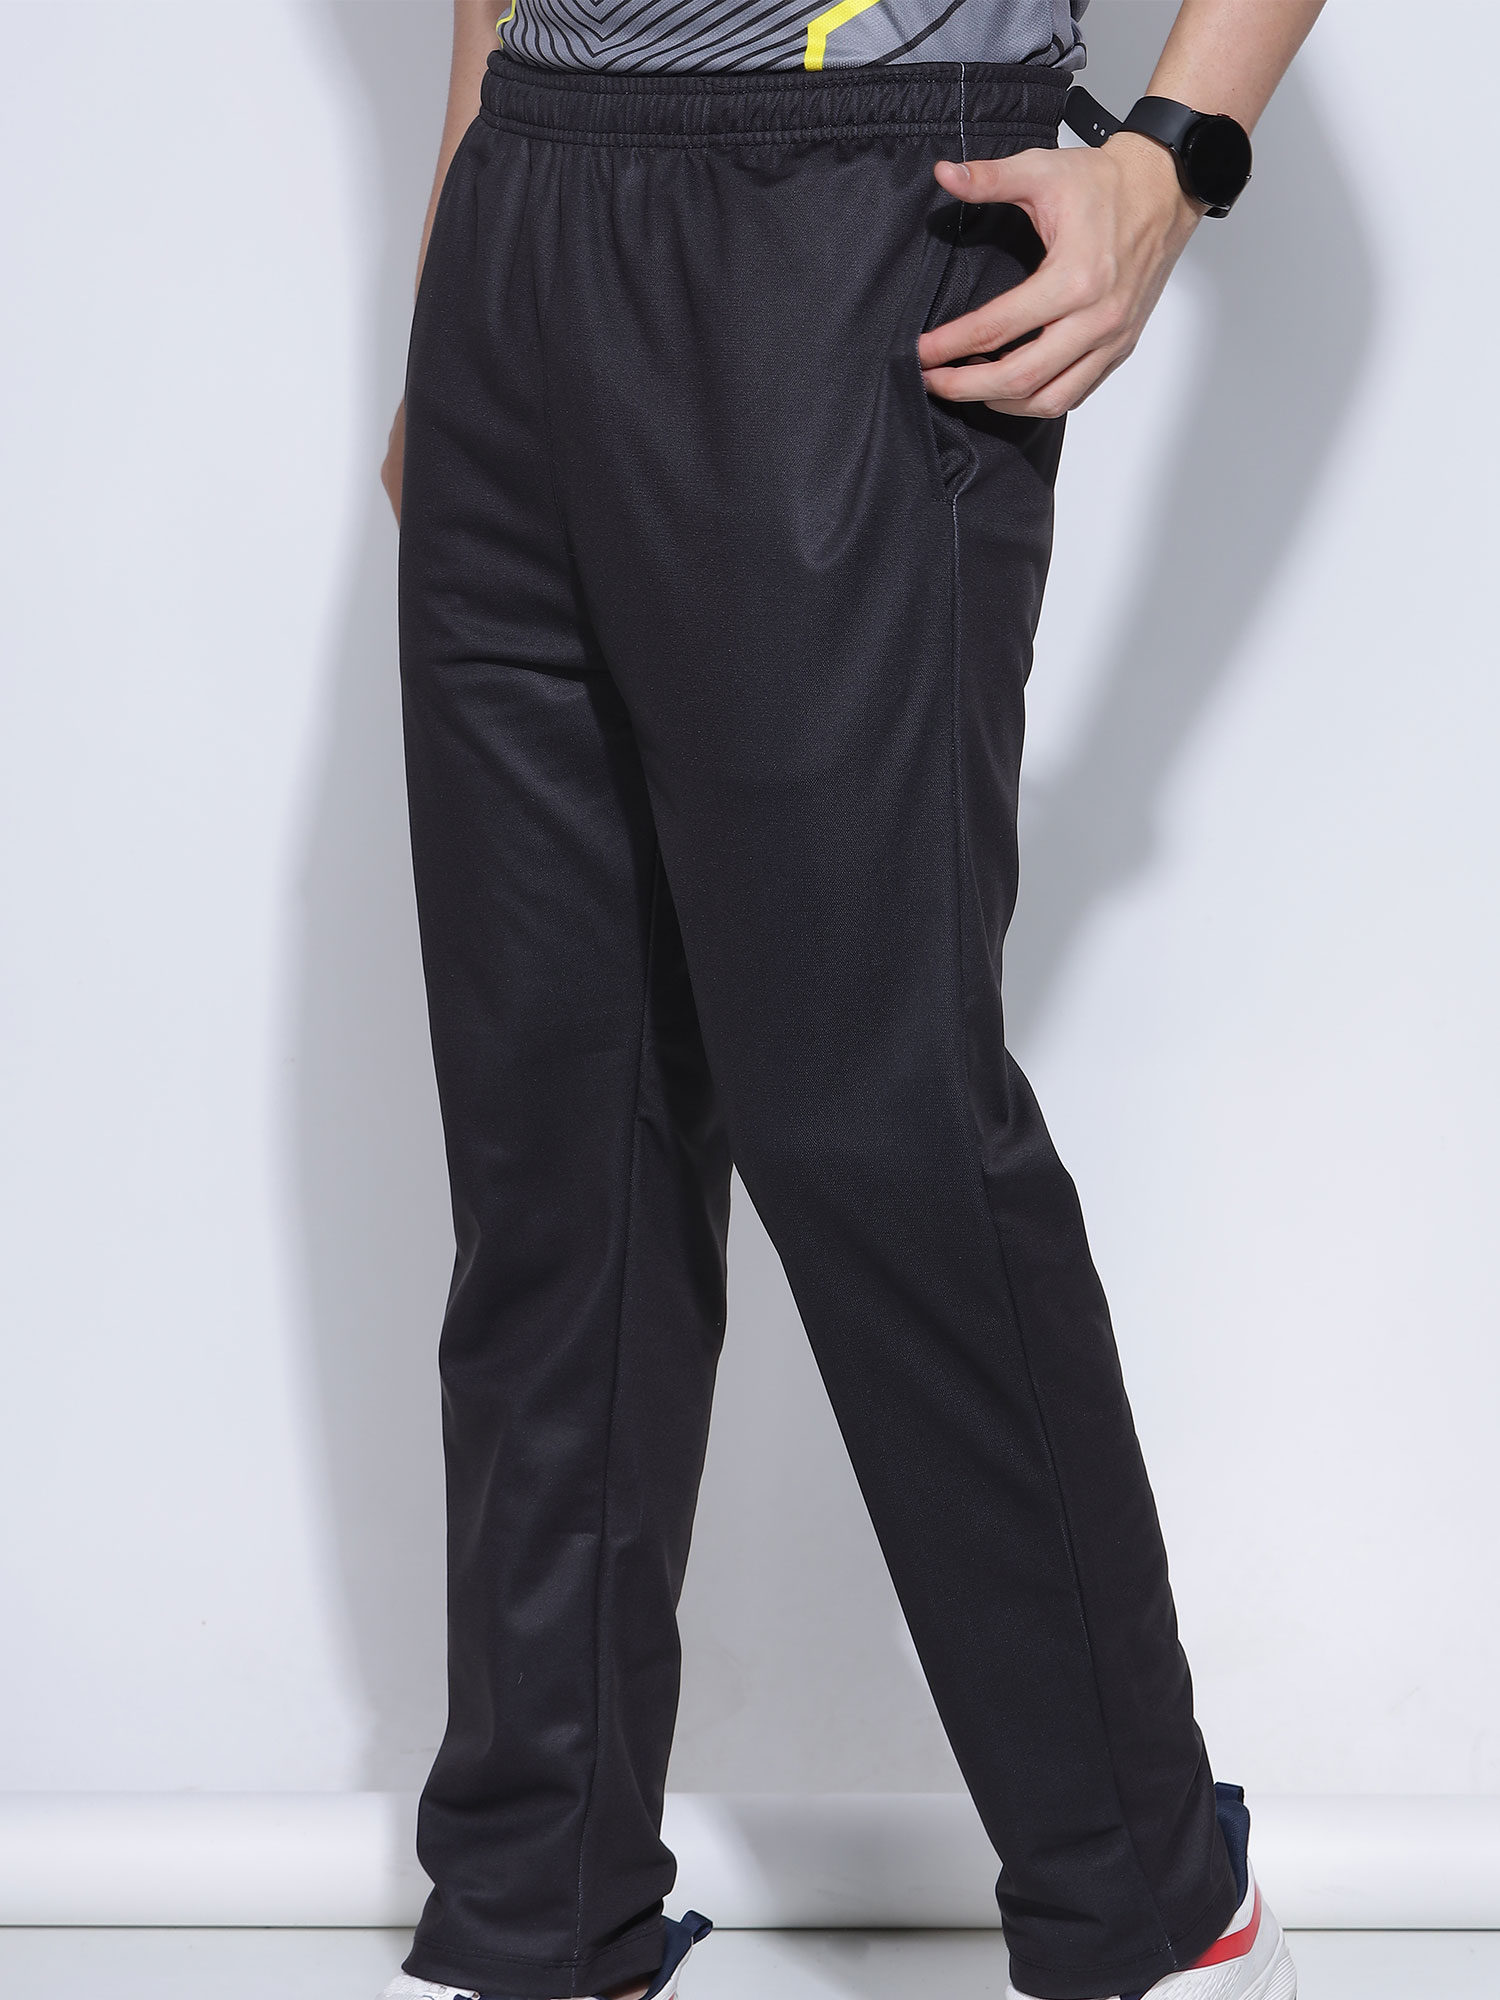 VectorX Mens Track Pant Black  Buy Mens Track Pant Online in India   TheSportStuff